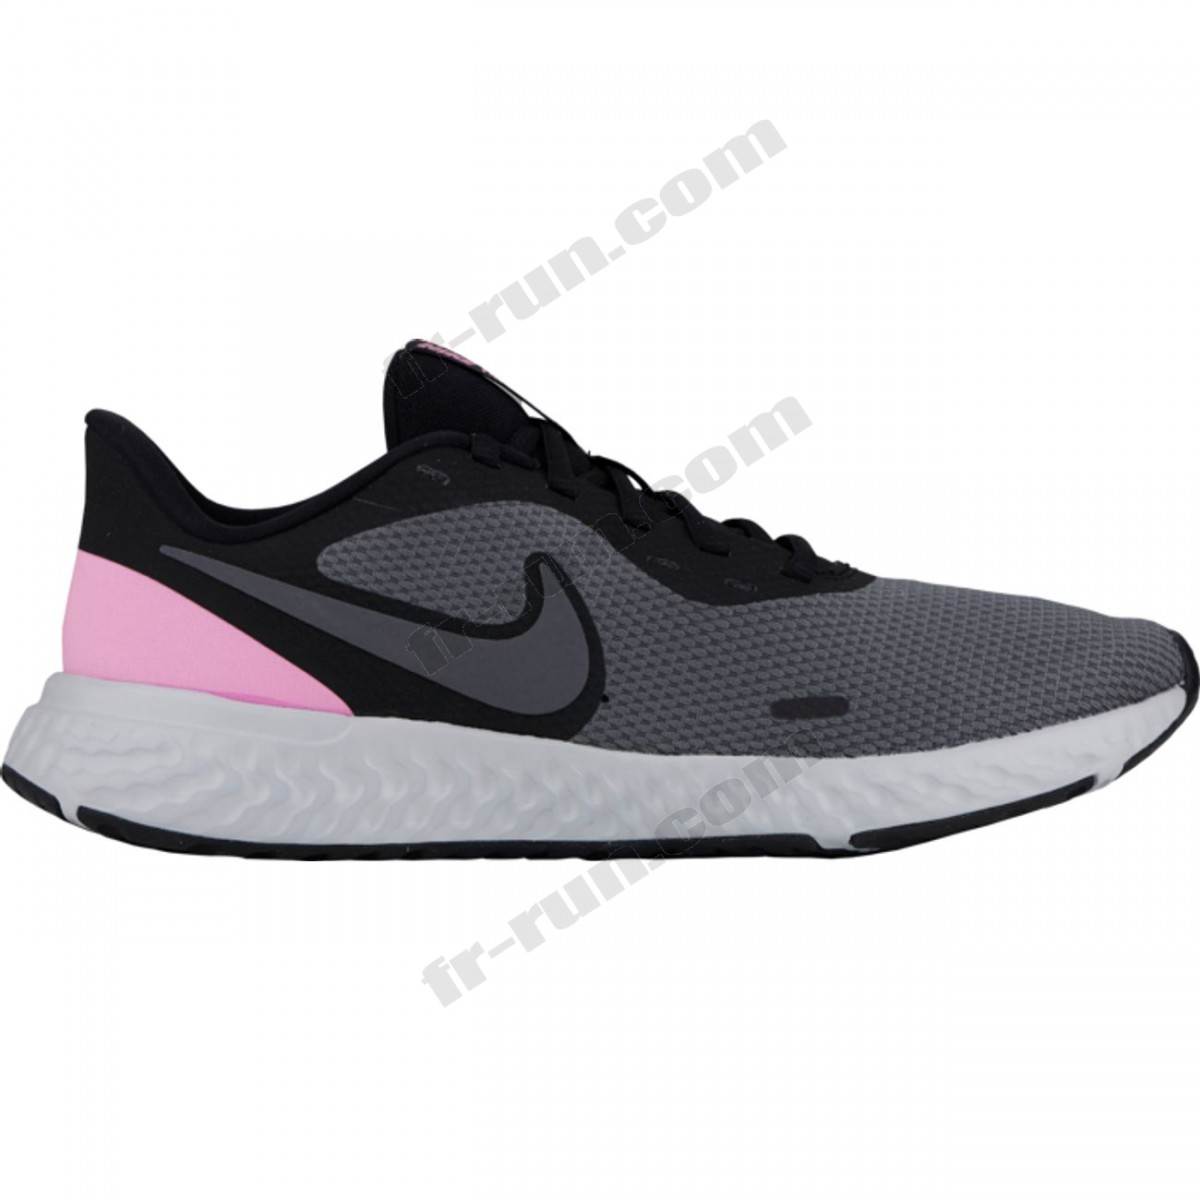 Nike/CHAUSSURES BASSES running femme NIKE WMNS NIKE REVOLUTION 5 √ Nouveau style √ Soldes - -0